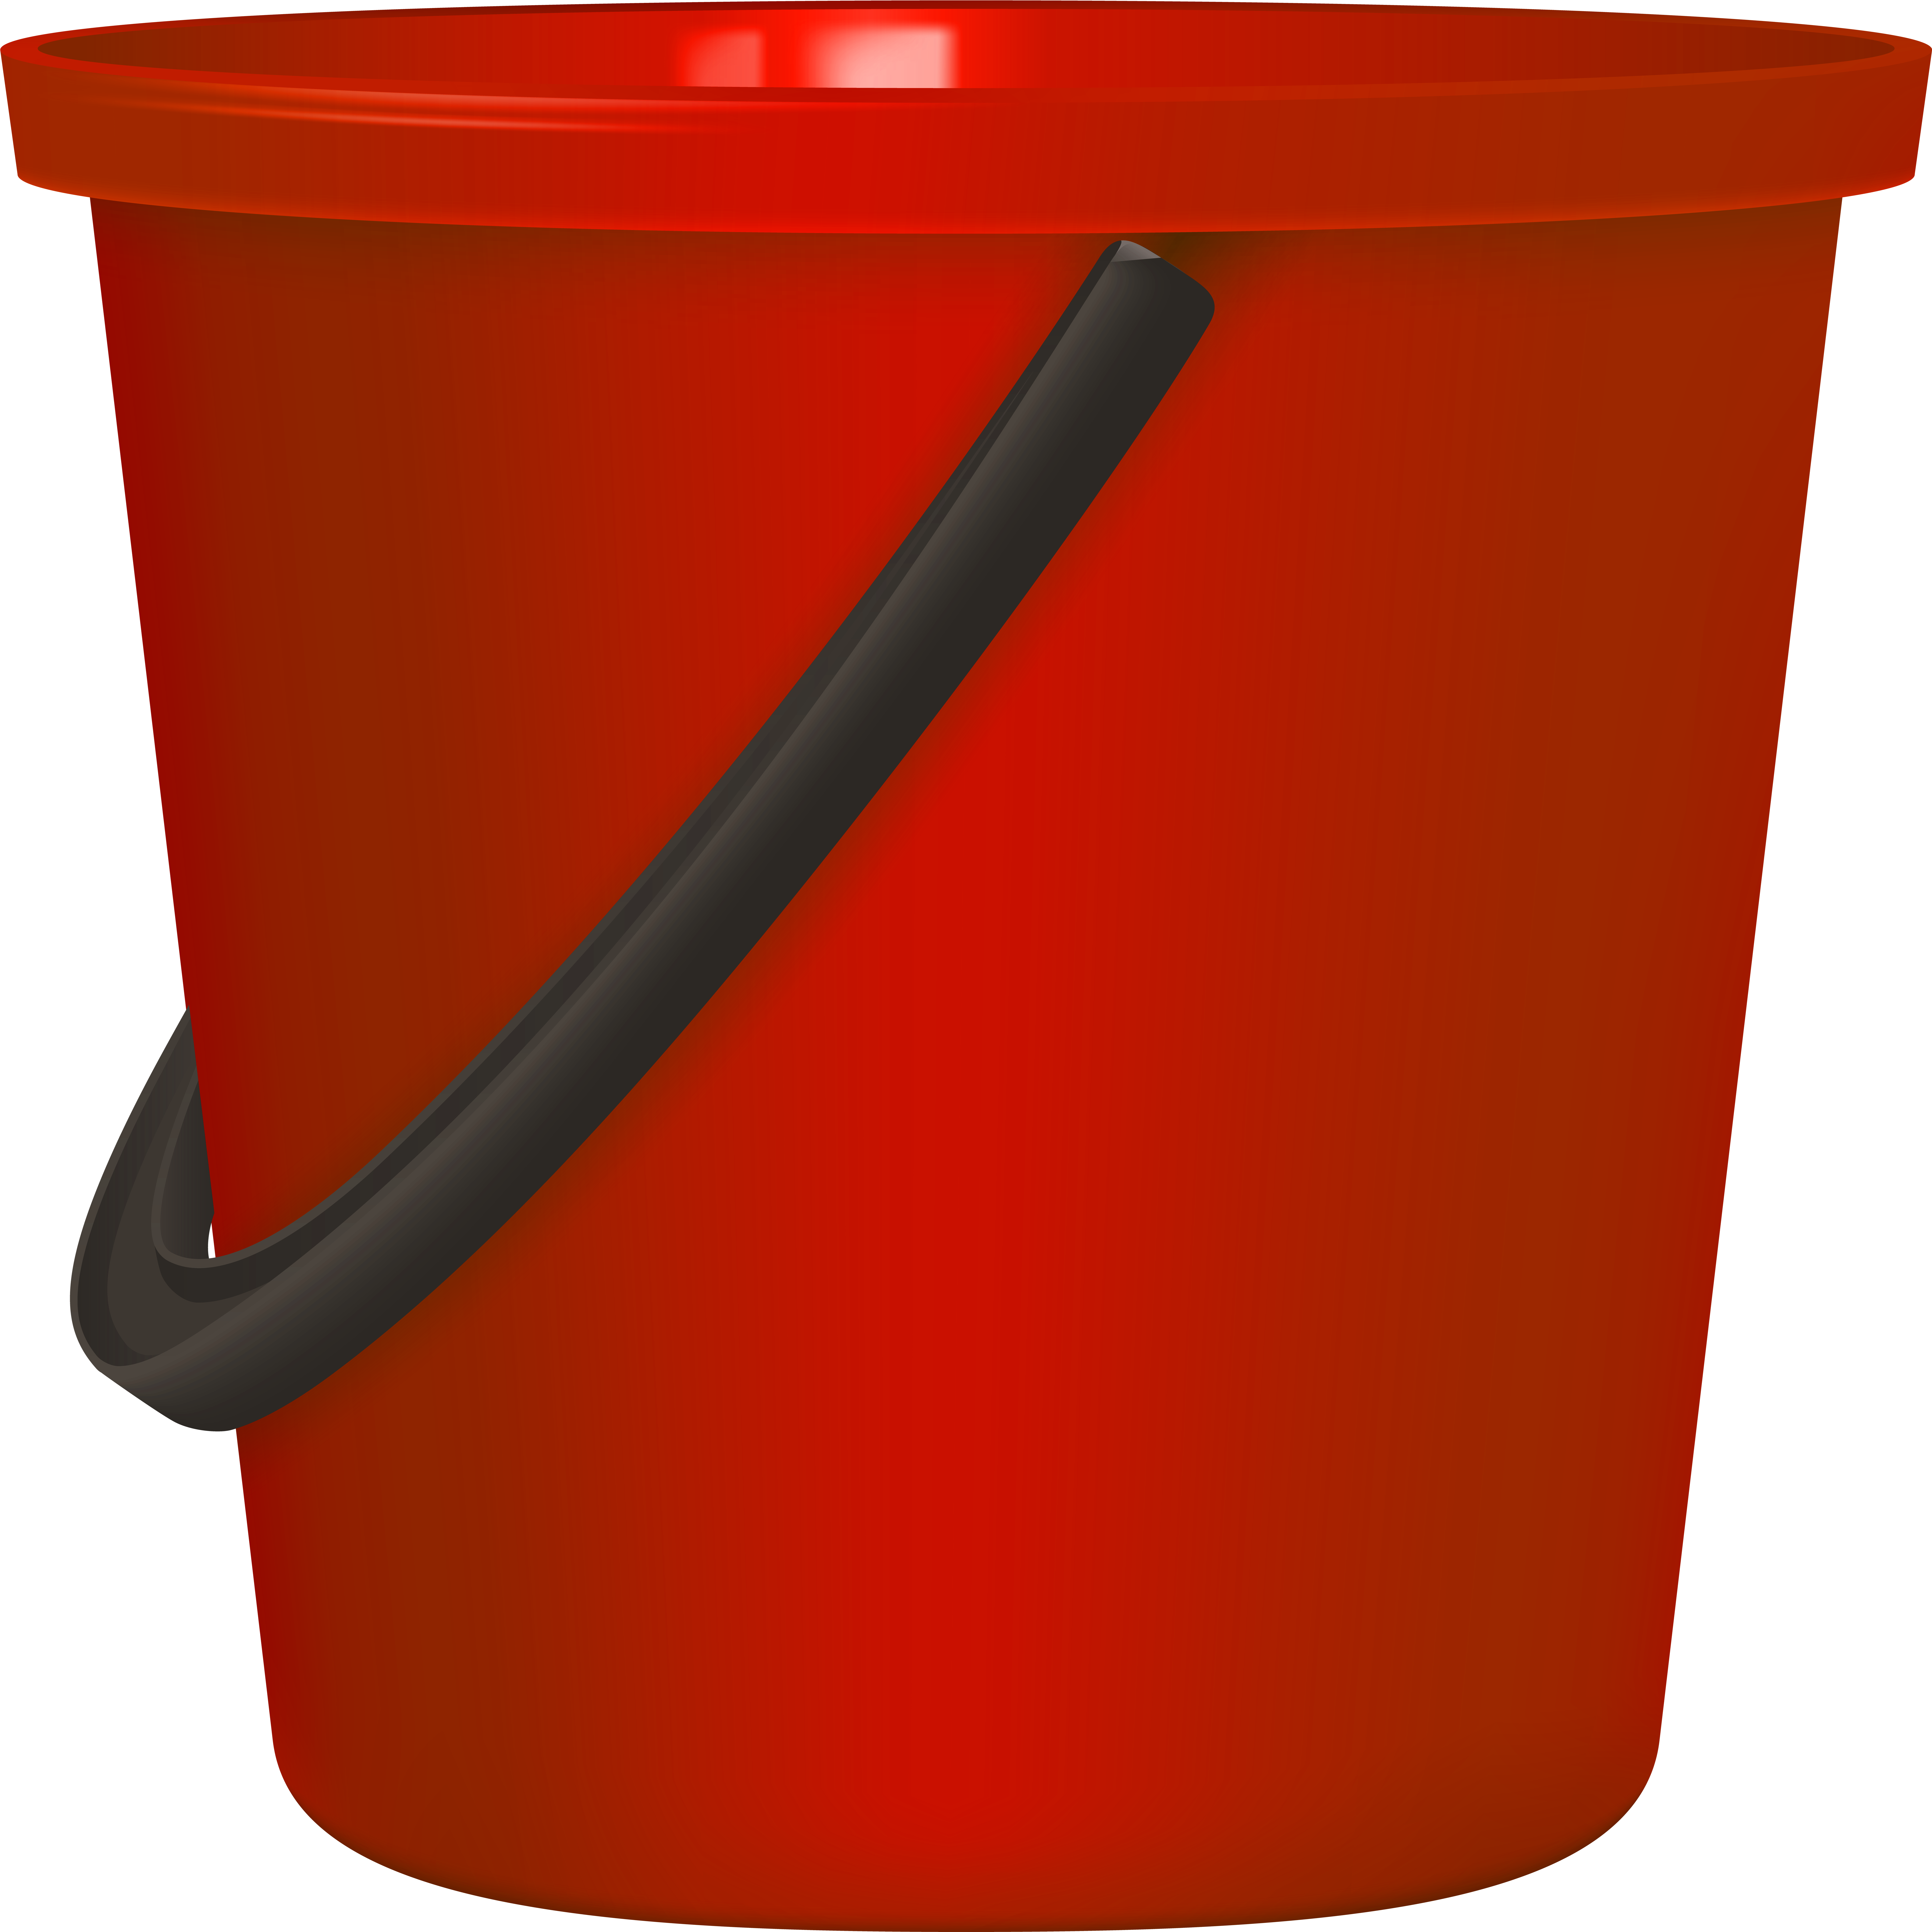 A Red Bucket With A Black Handle